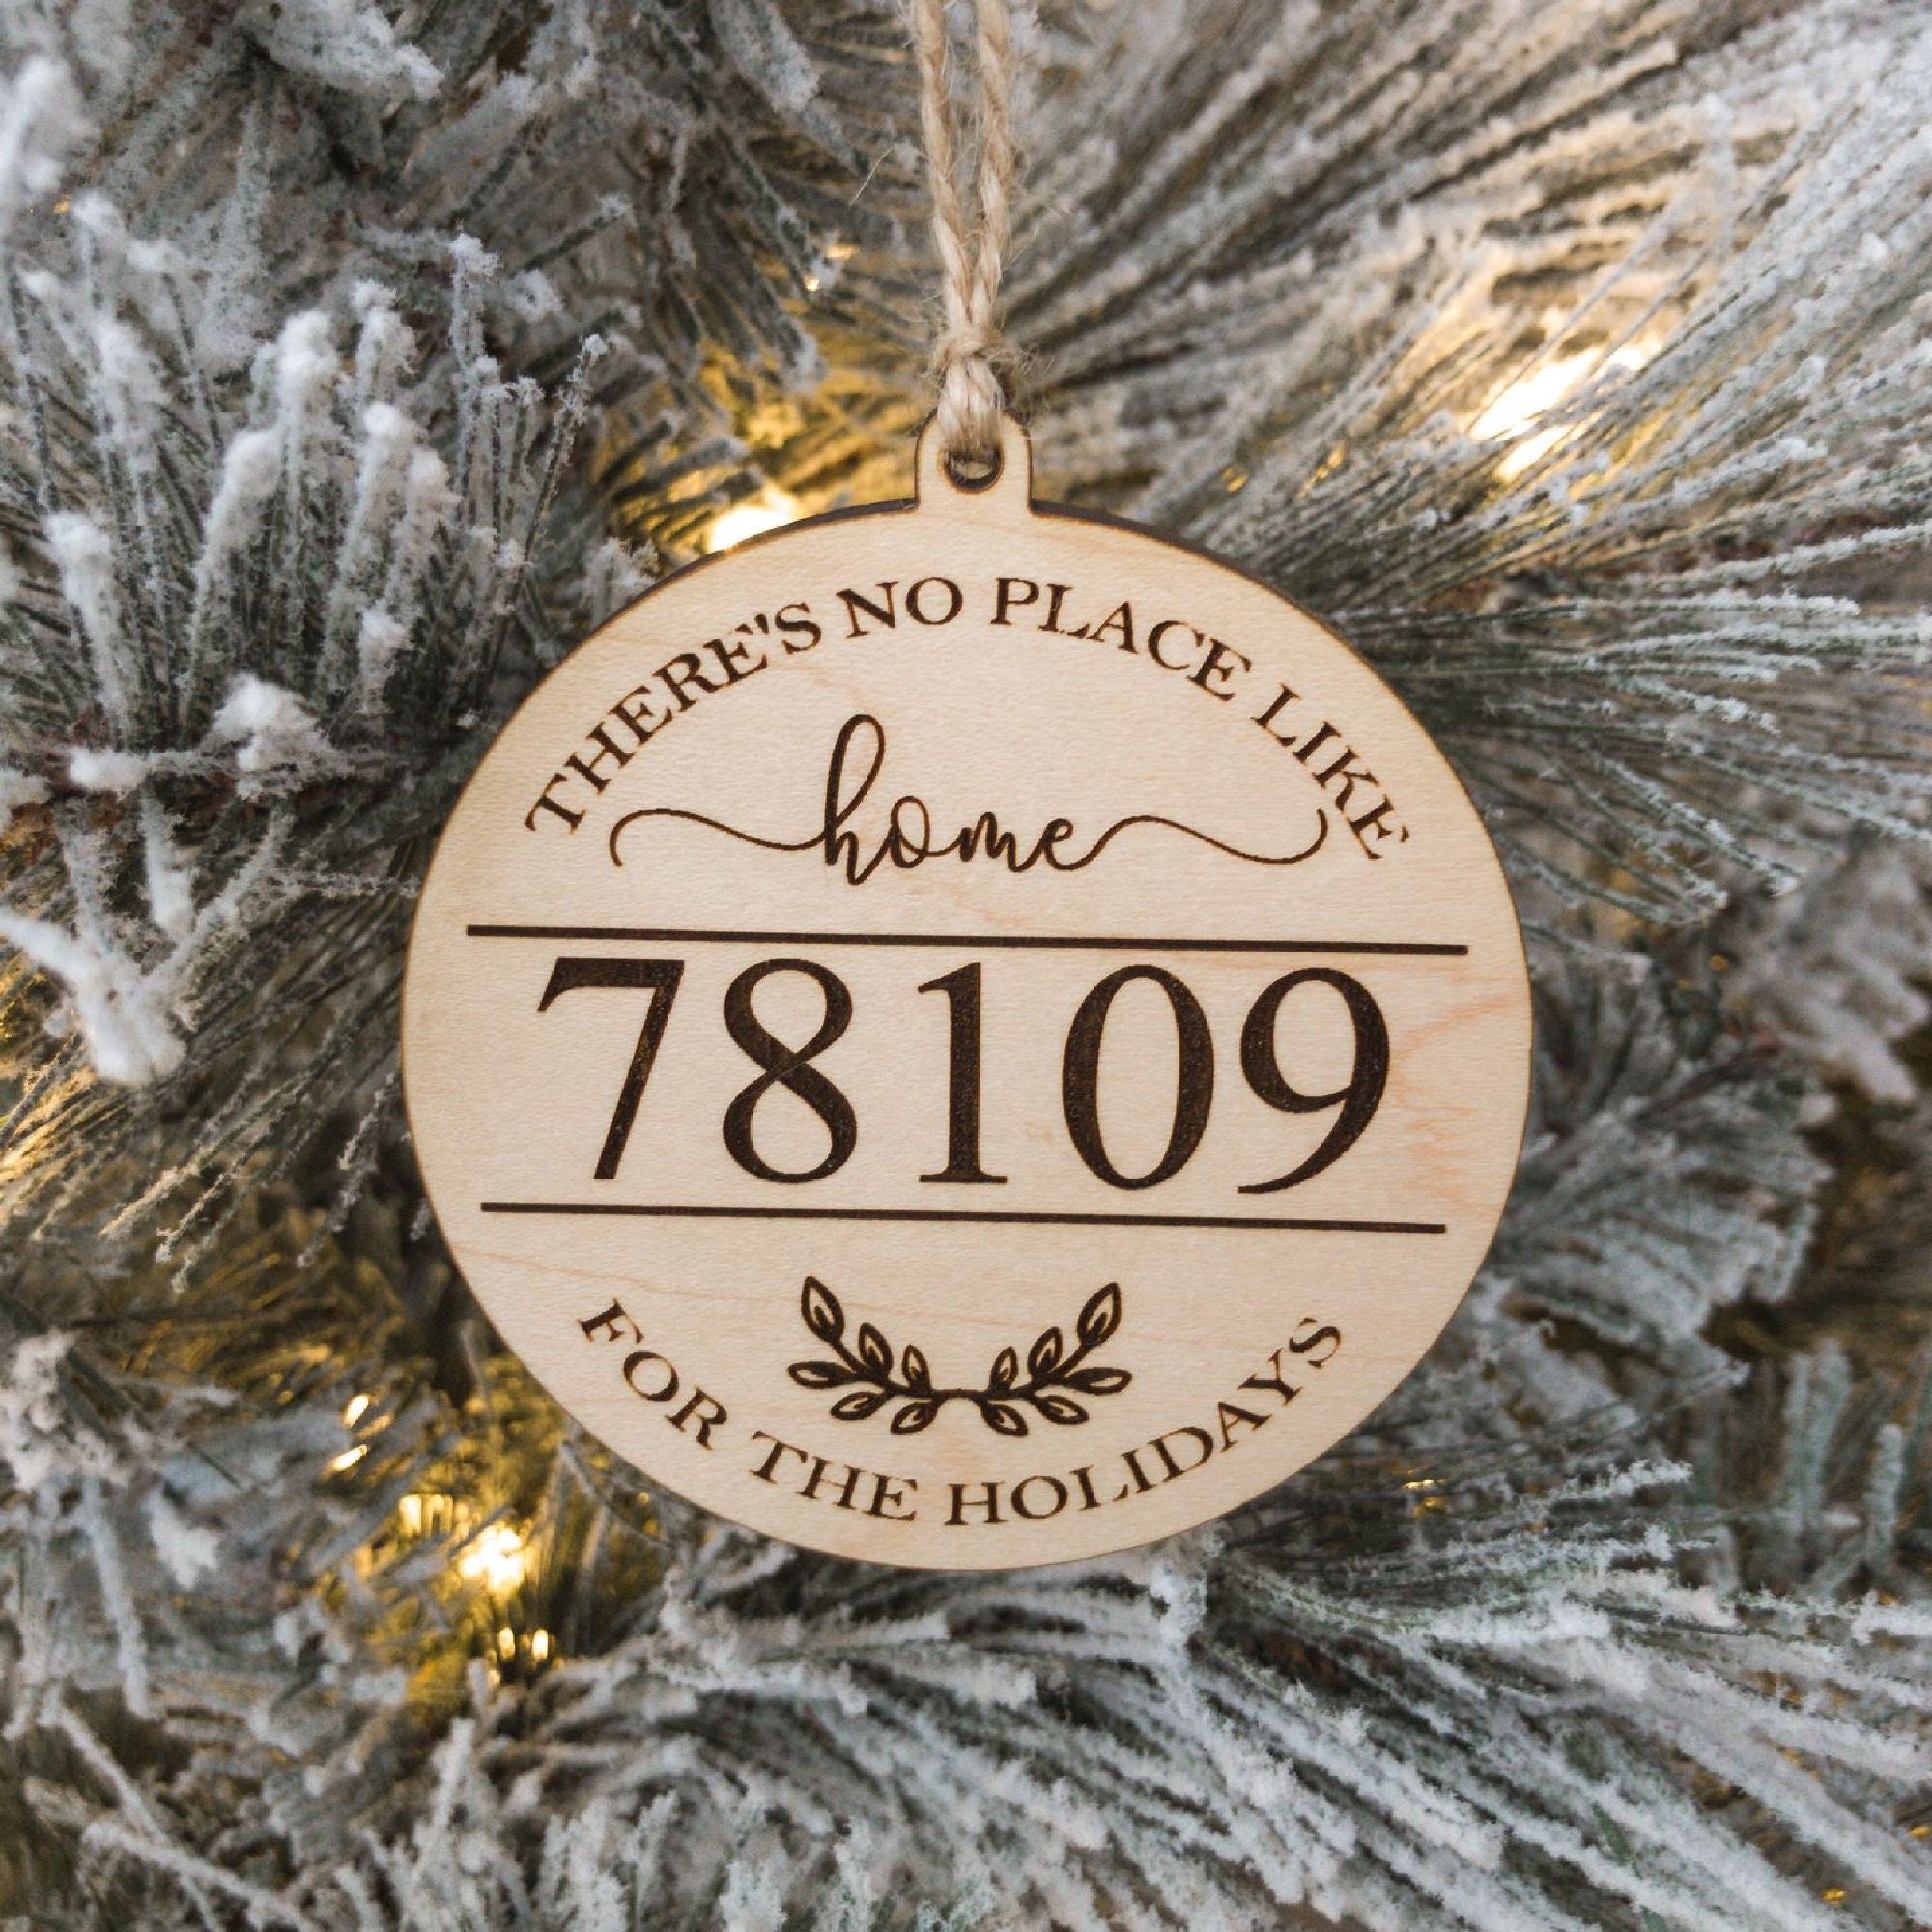 Personalized zip code ornament, New Home Owner Gift, Neighbor Gift, Ho